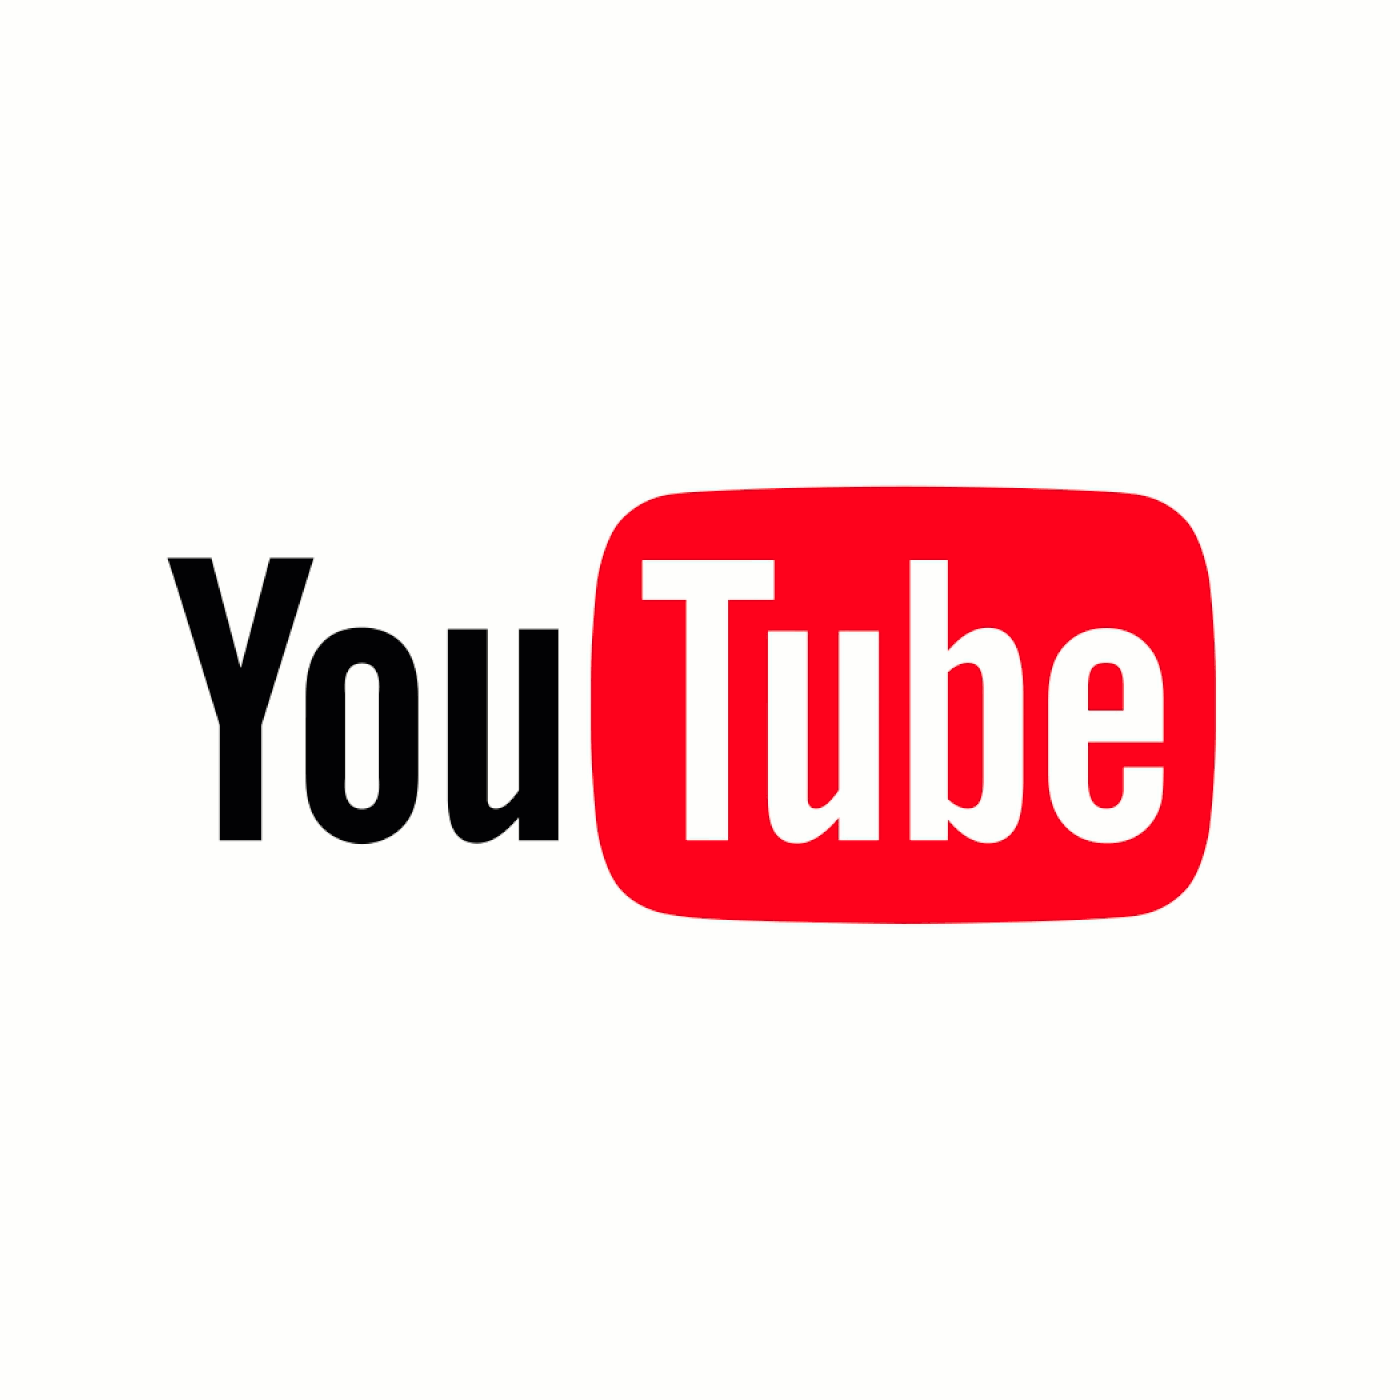 YouTube Old Logo - YouTube has a new look and, for the first time, a new logo